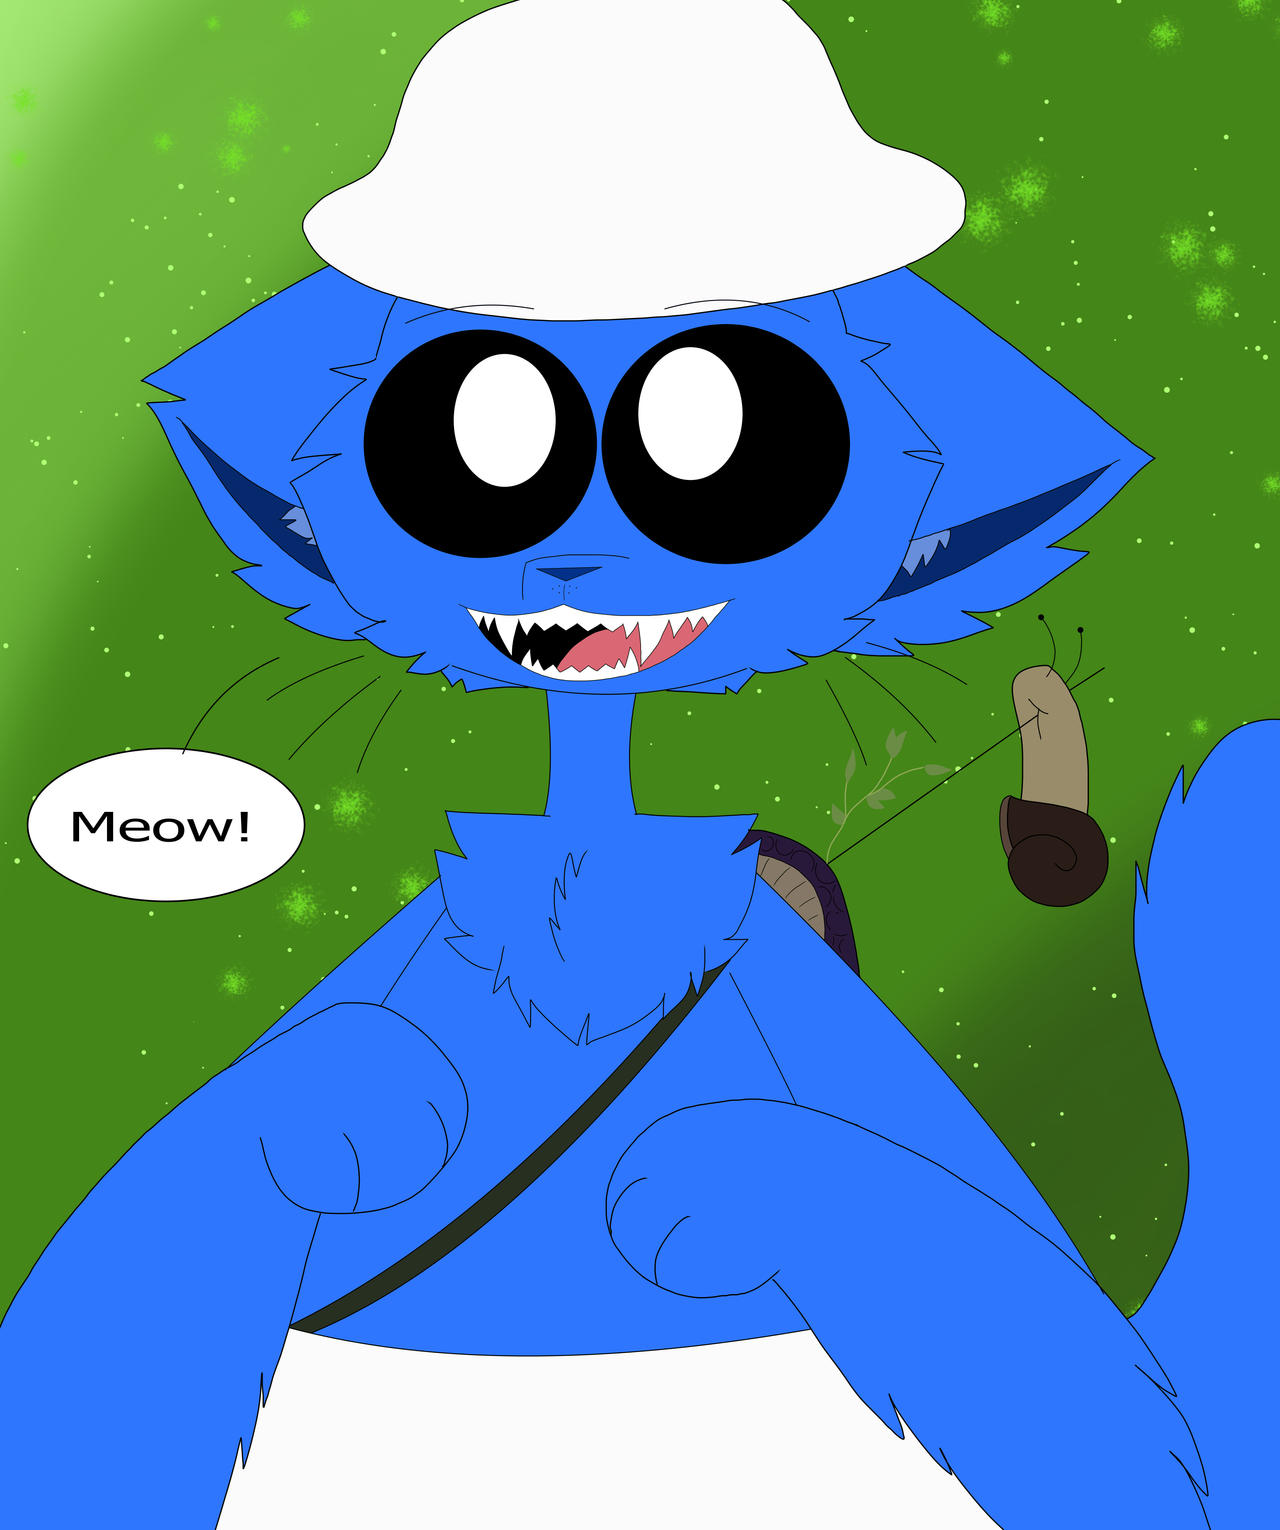 Smurf Cat by plieguito on Newgrounds